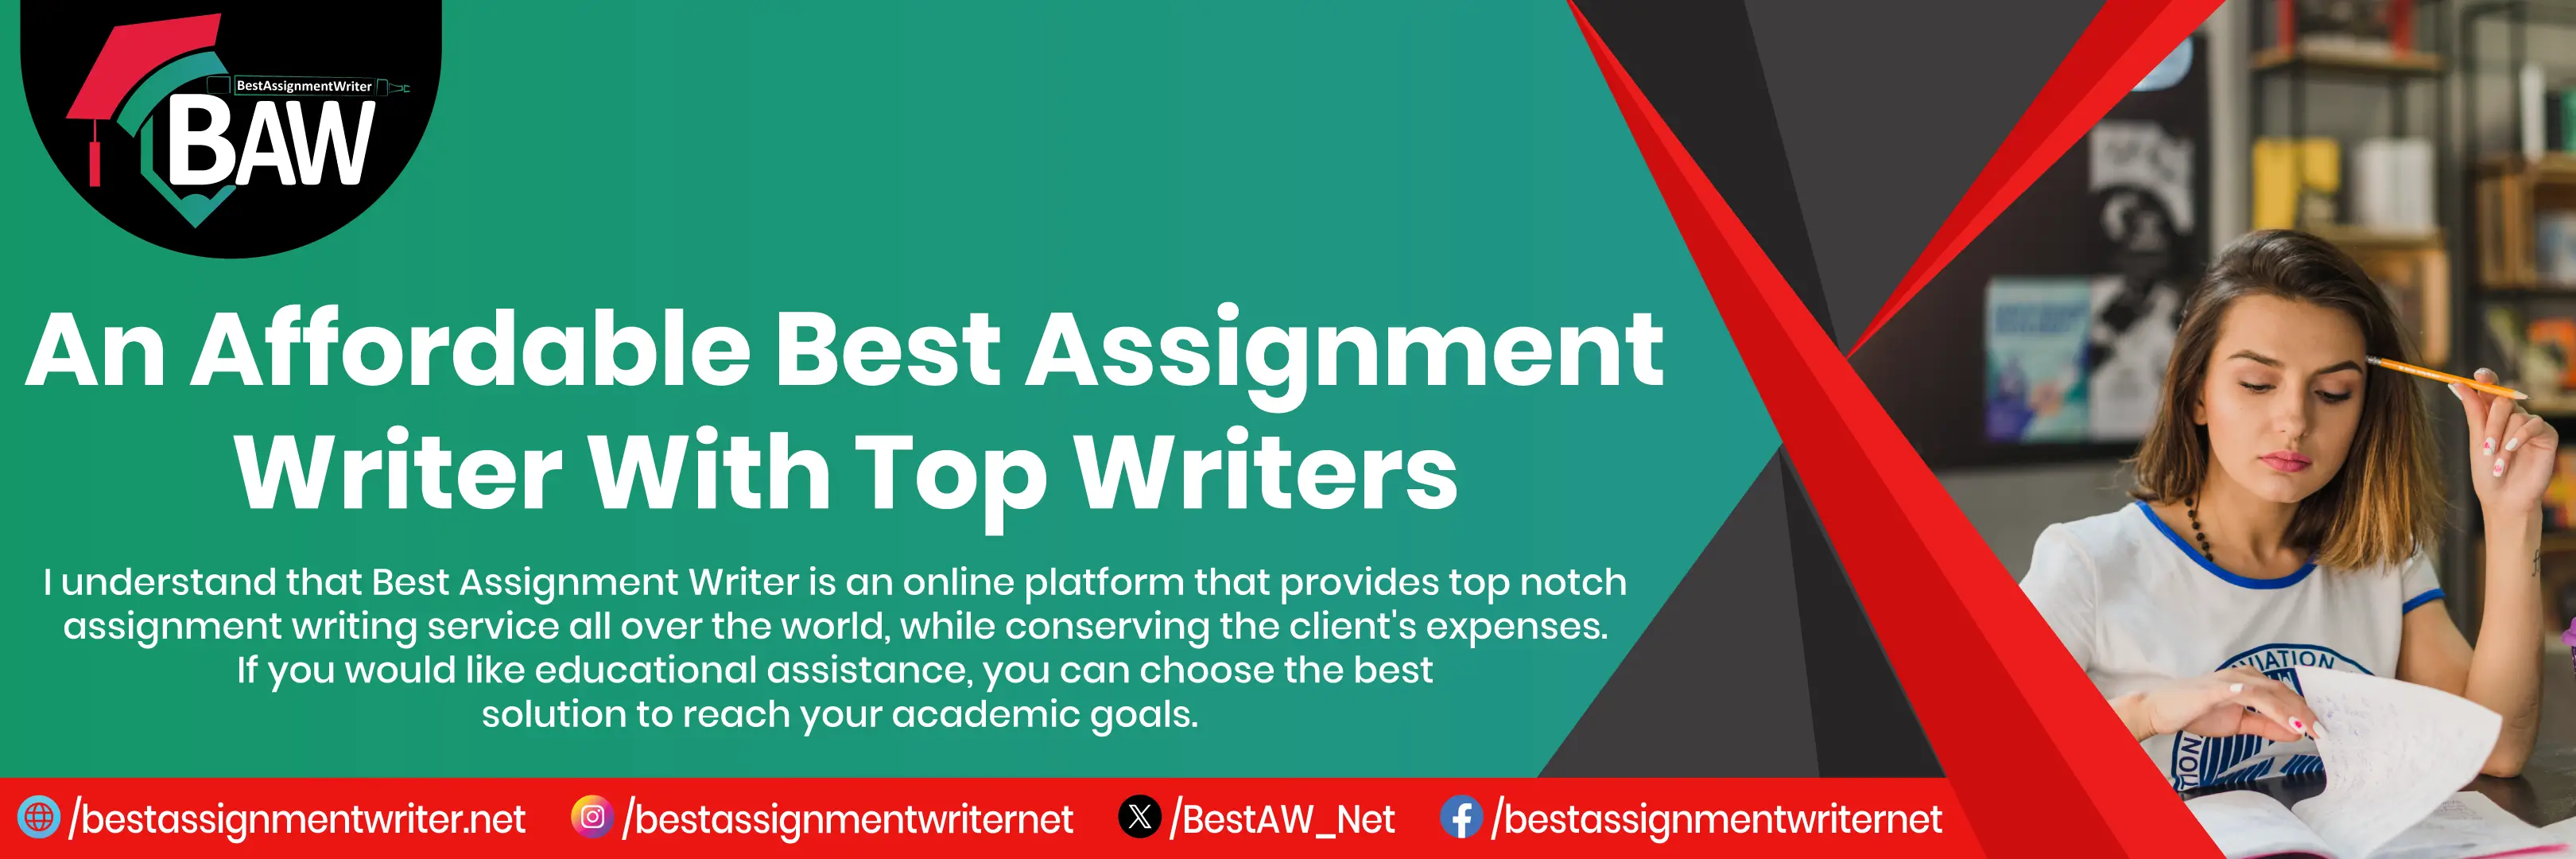 An Affordable Best Assignment Writer With Top Writers